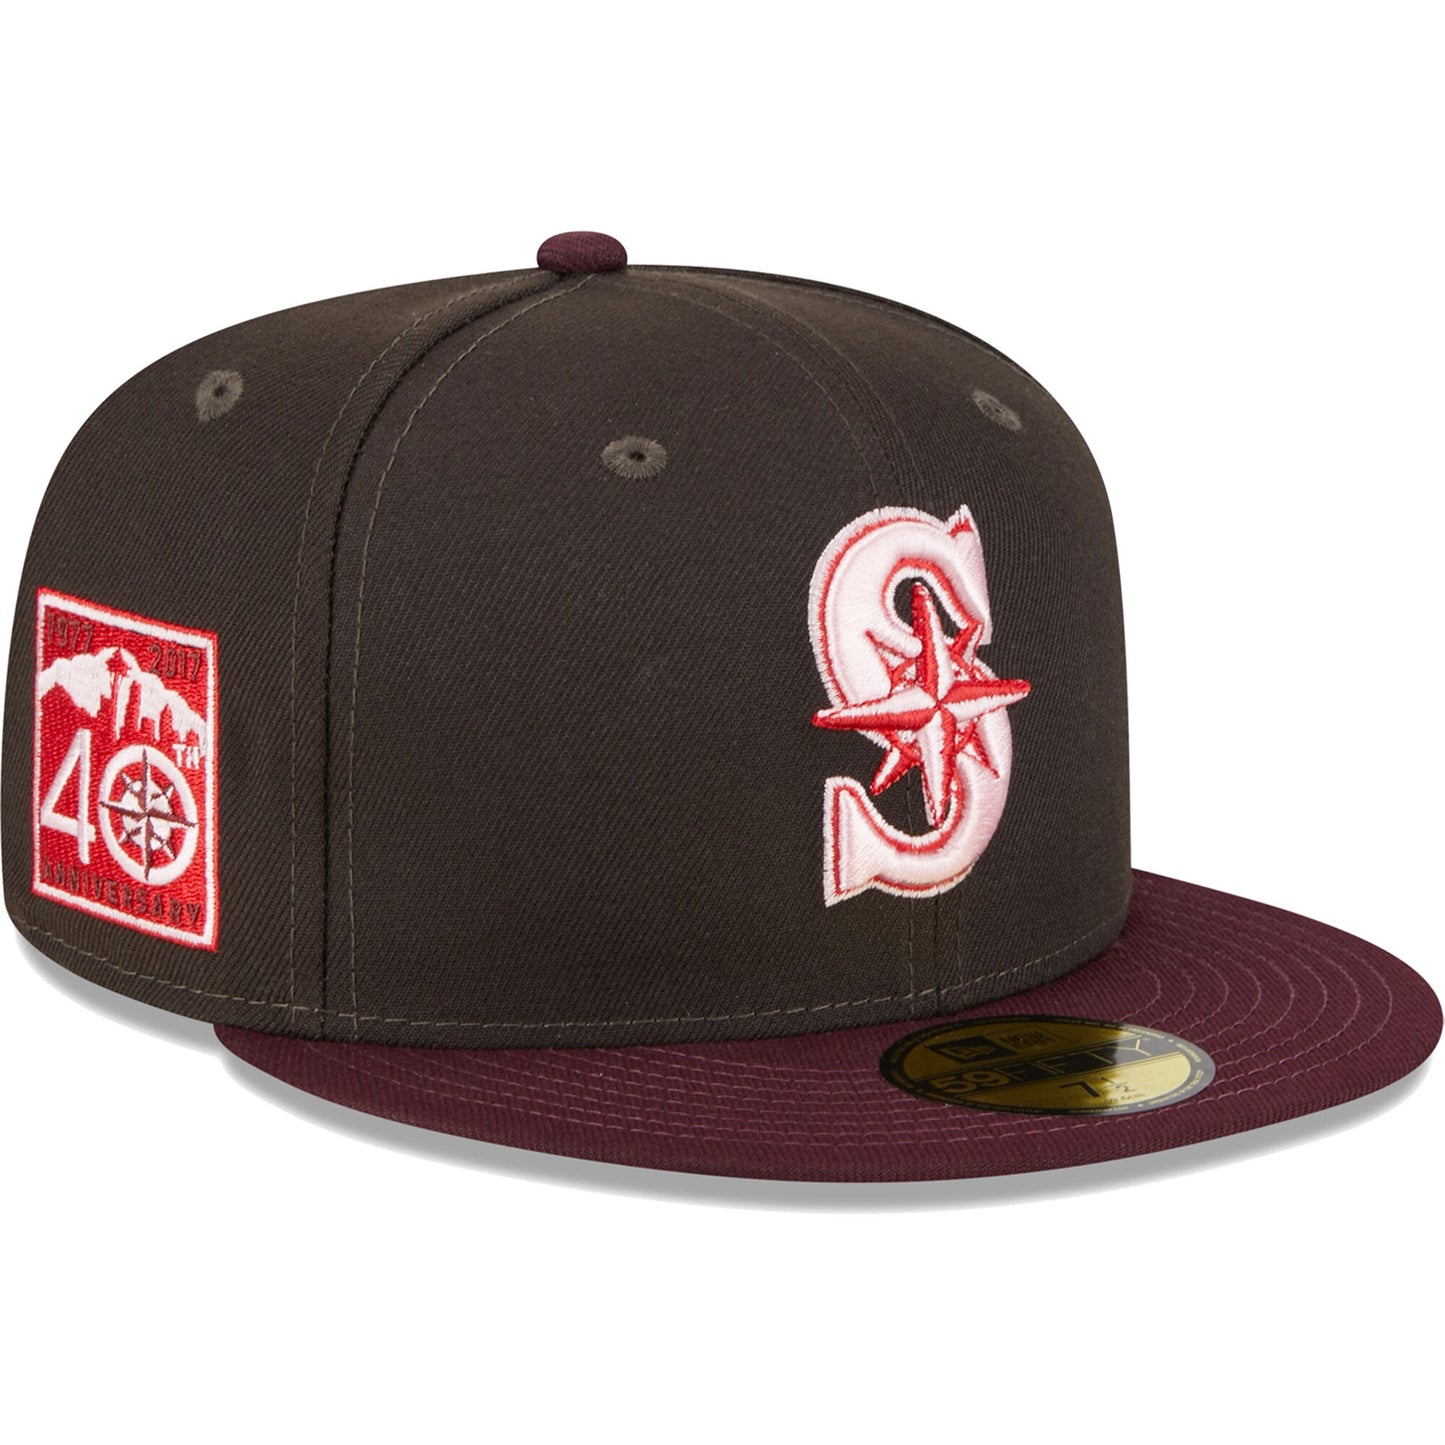 Seattle Mariners New Era Chocolate Strawberry 59FIFTY Fitted Hat - Brown/Maroon